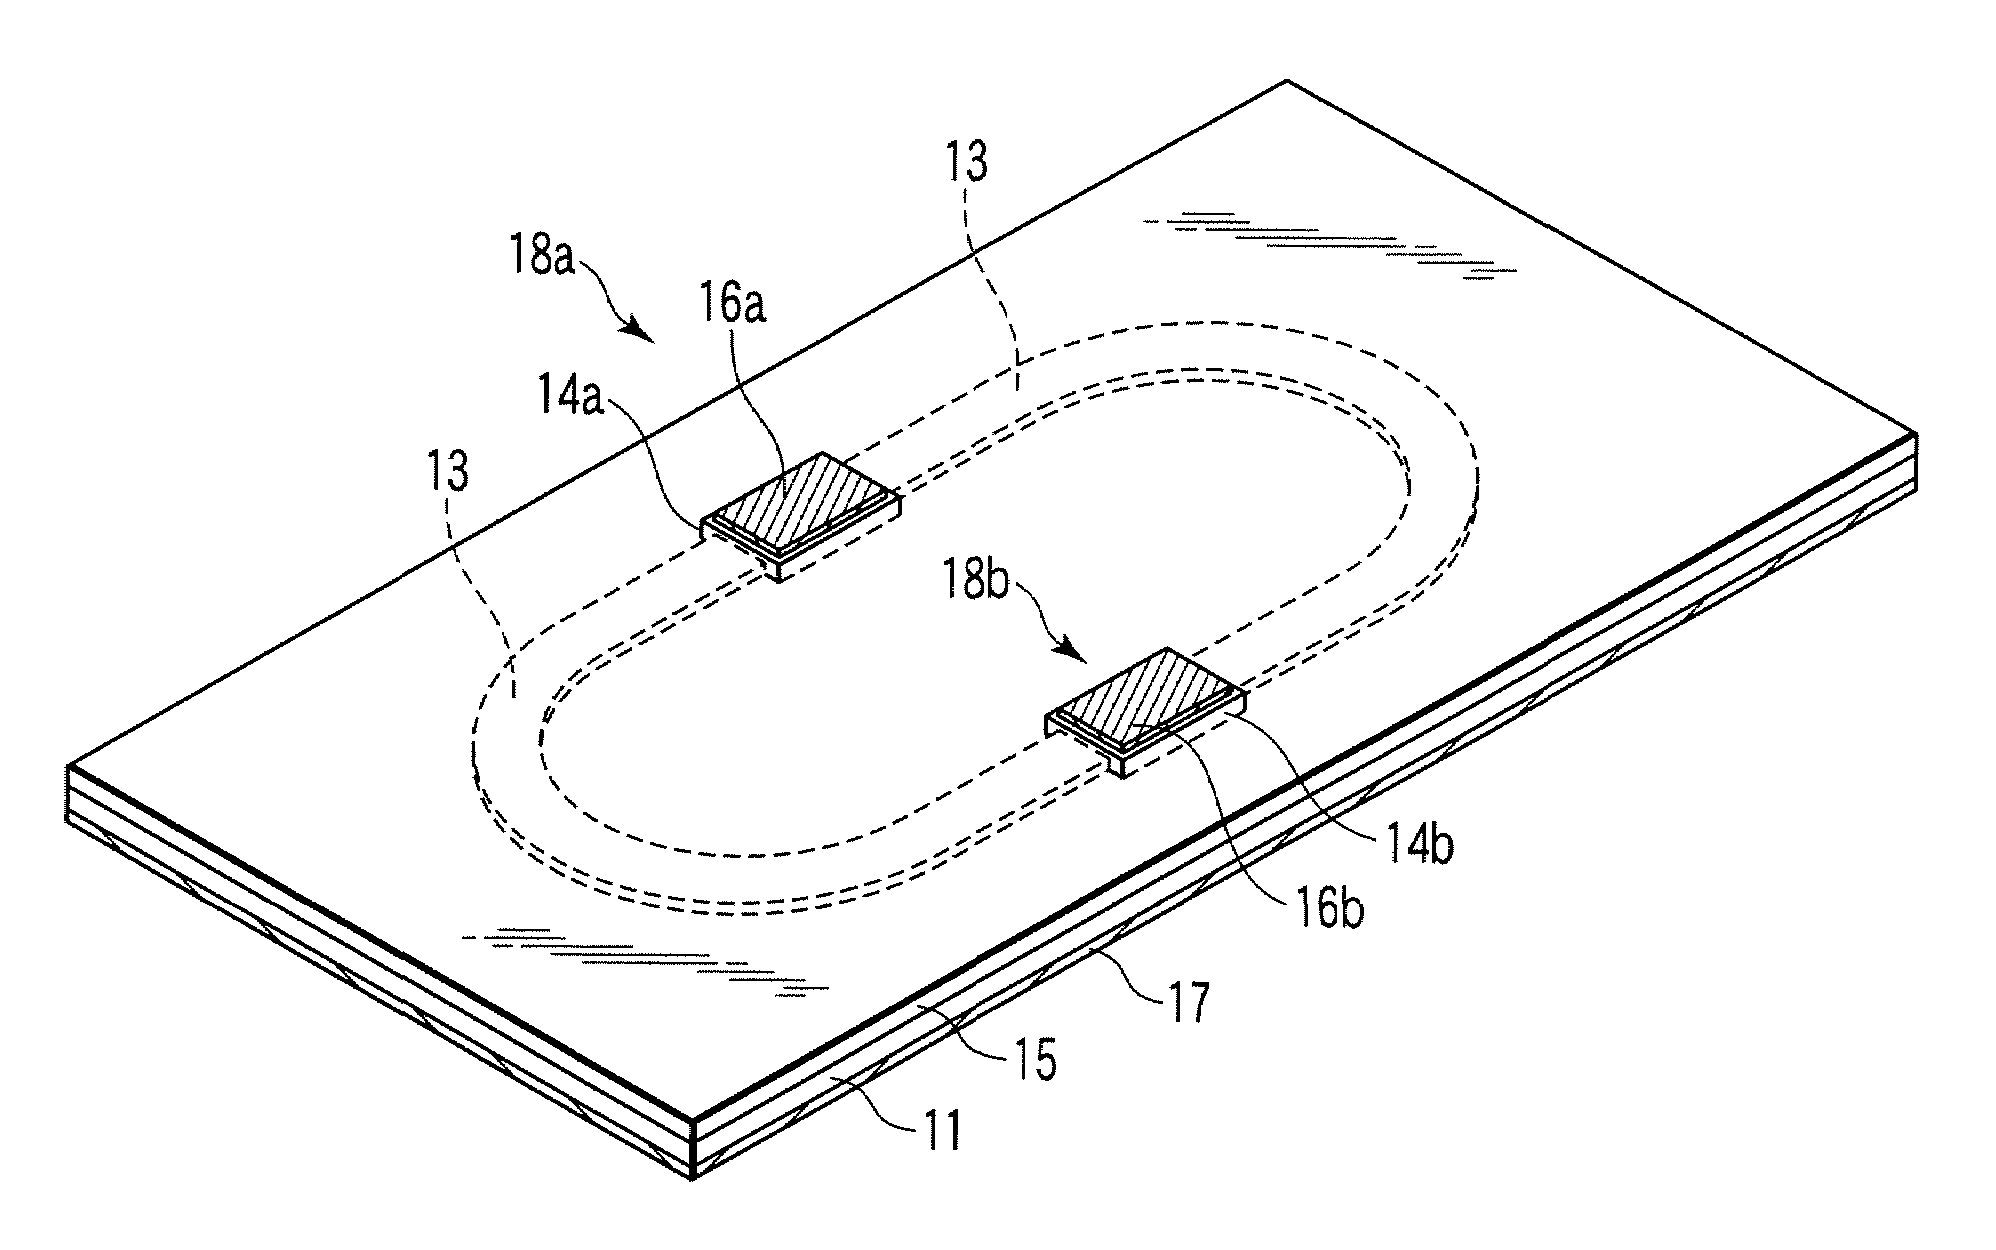 Laser-induced optical wiring apparatus